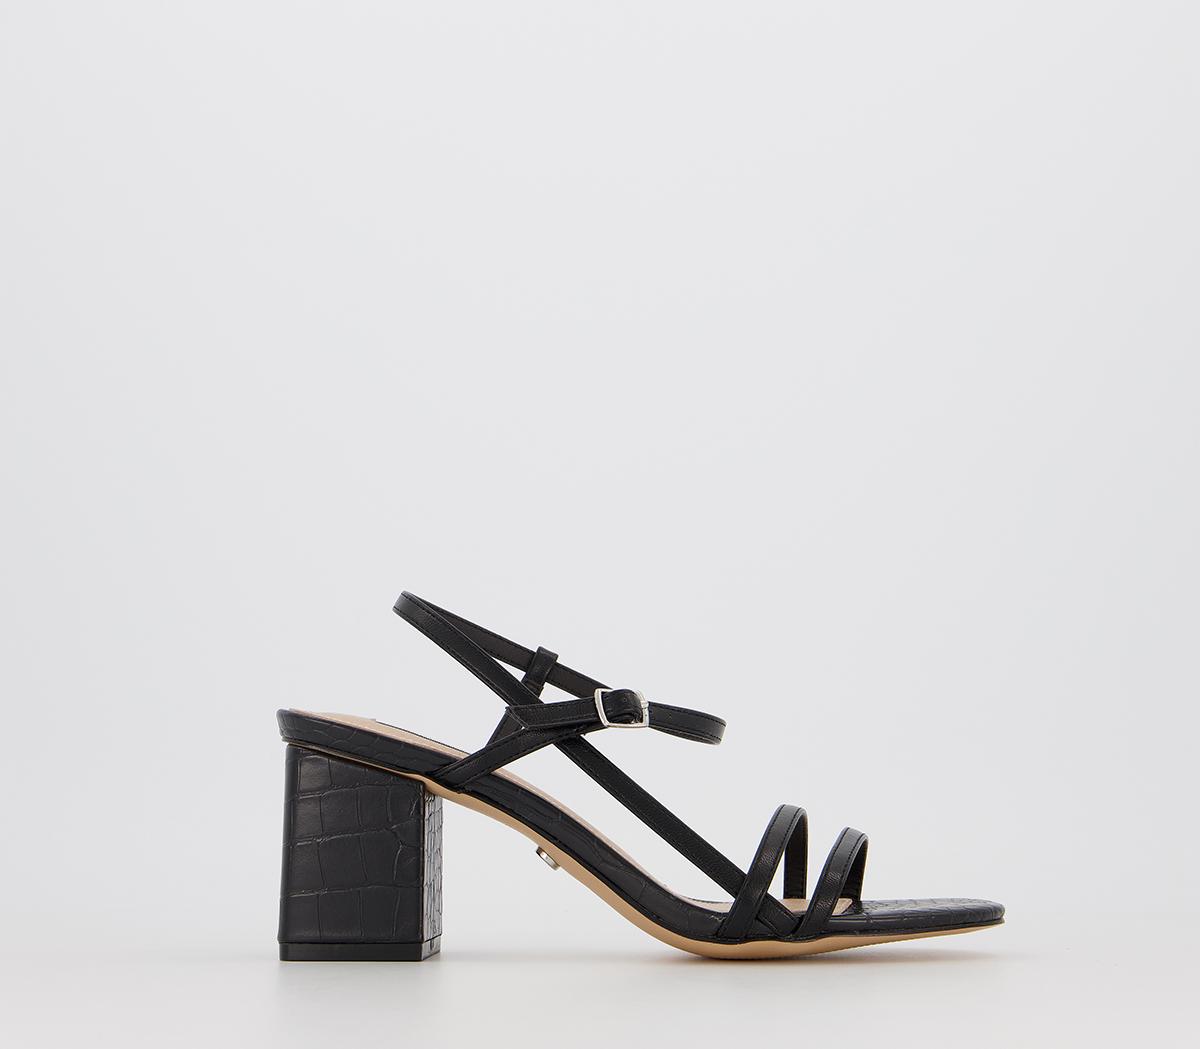 OFFICEMerry Strappy Block SandalsBlack Mix